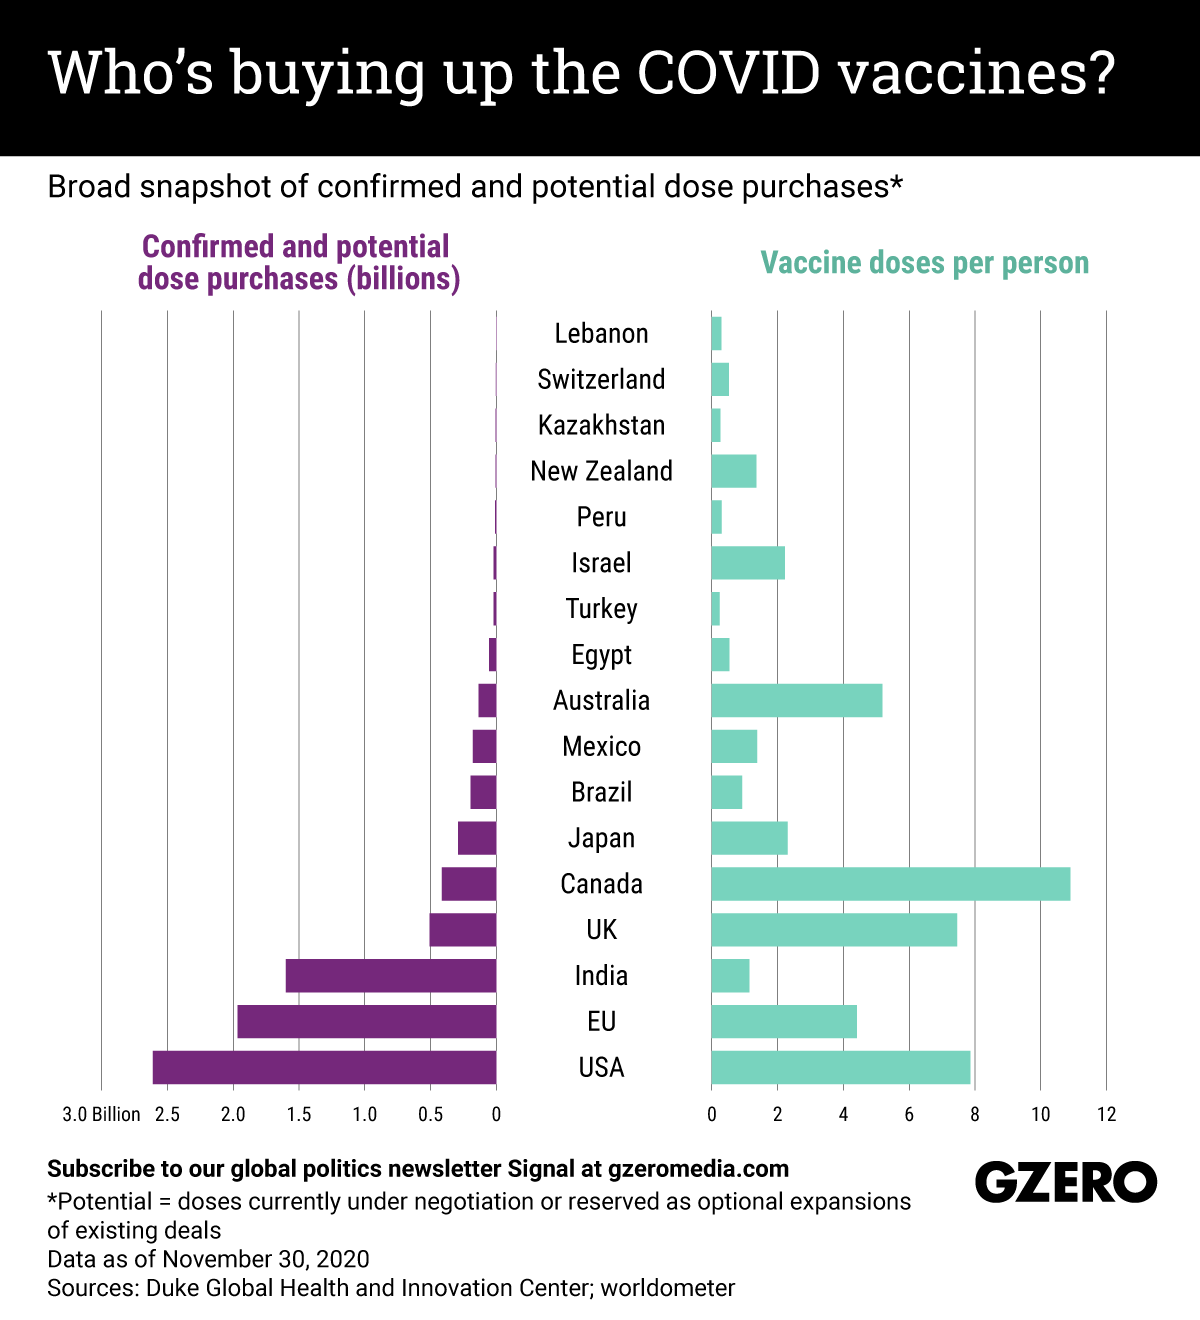 The Graphic Truth: Who's buying up the COVID vaccines?